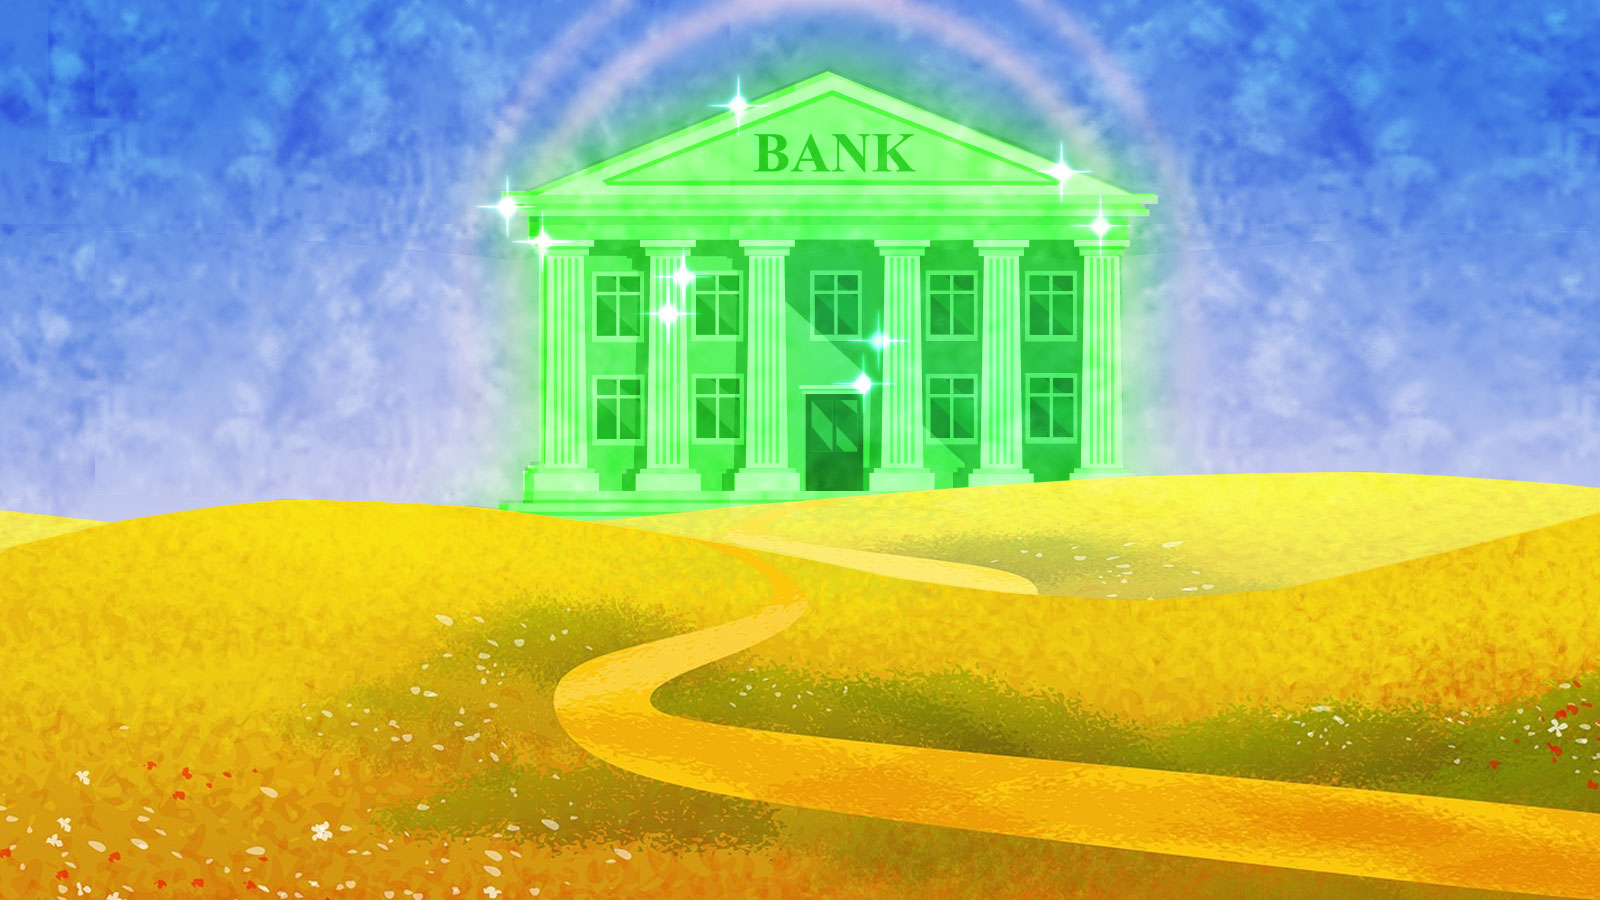 A bank in the style of the Emerald City in The Wizard of Oz